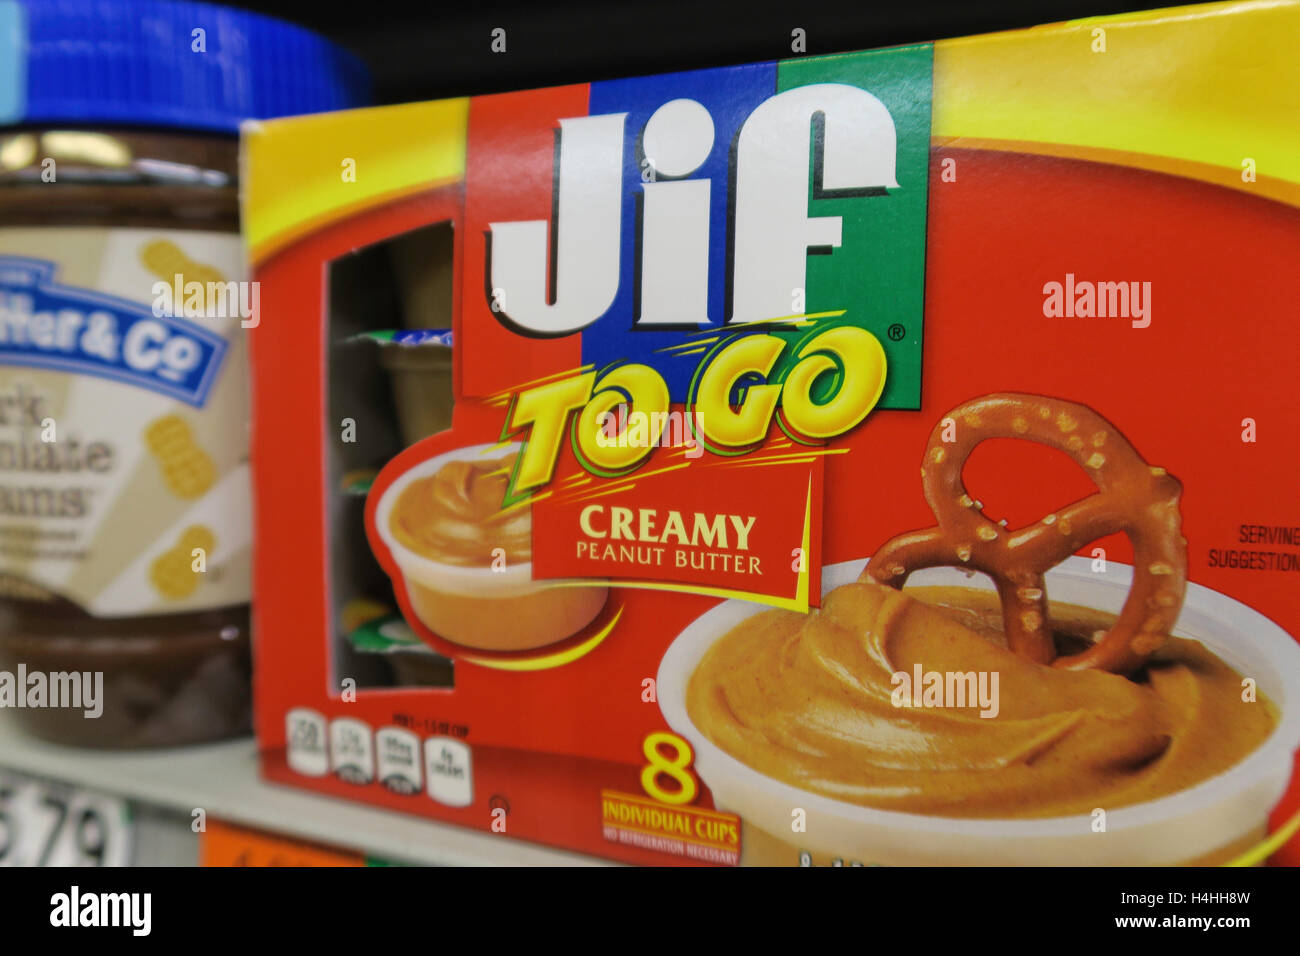 jif-to-go-brand-peanut-butter-boxes-on-grocery-store-shelf-usa-stock